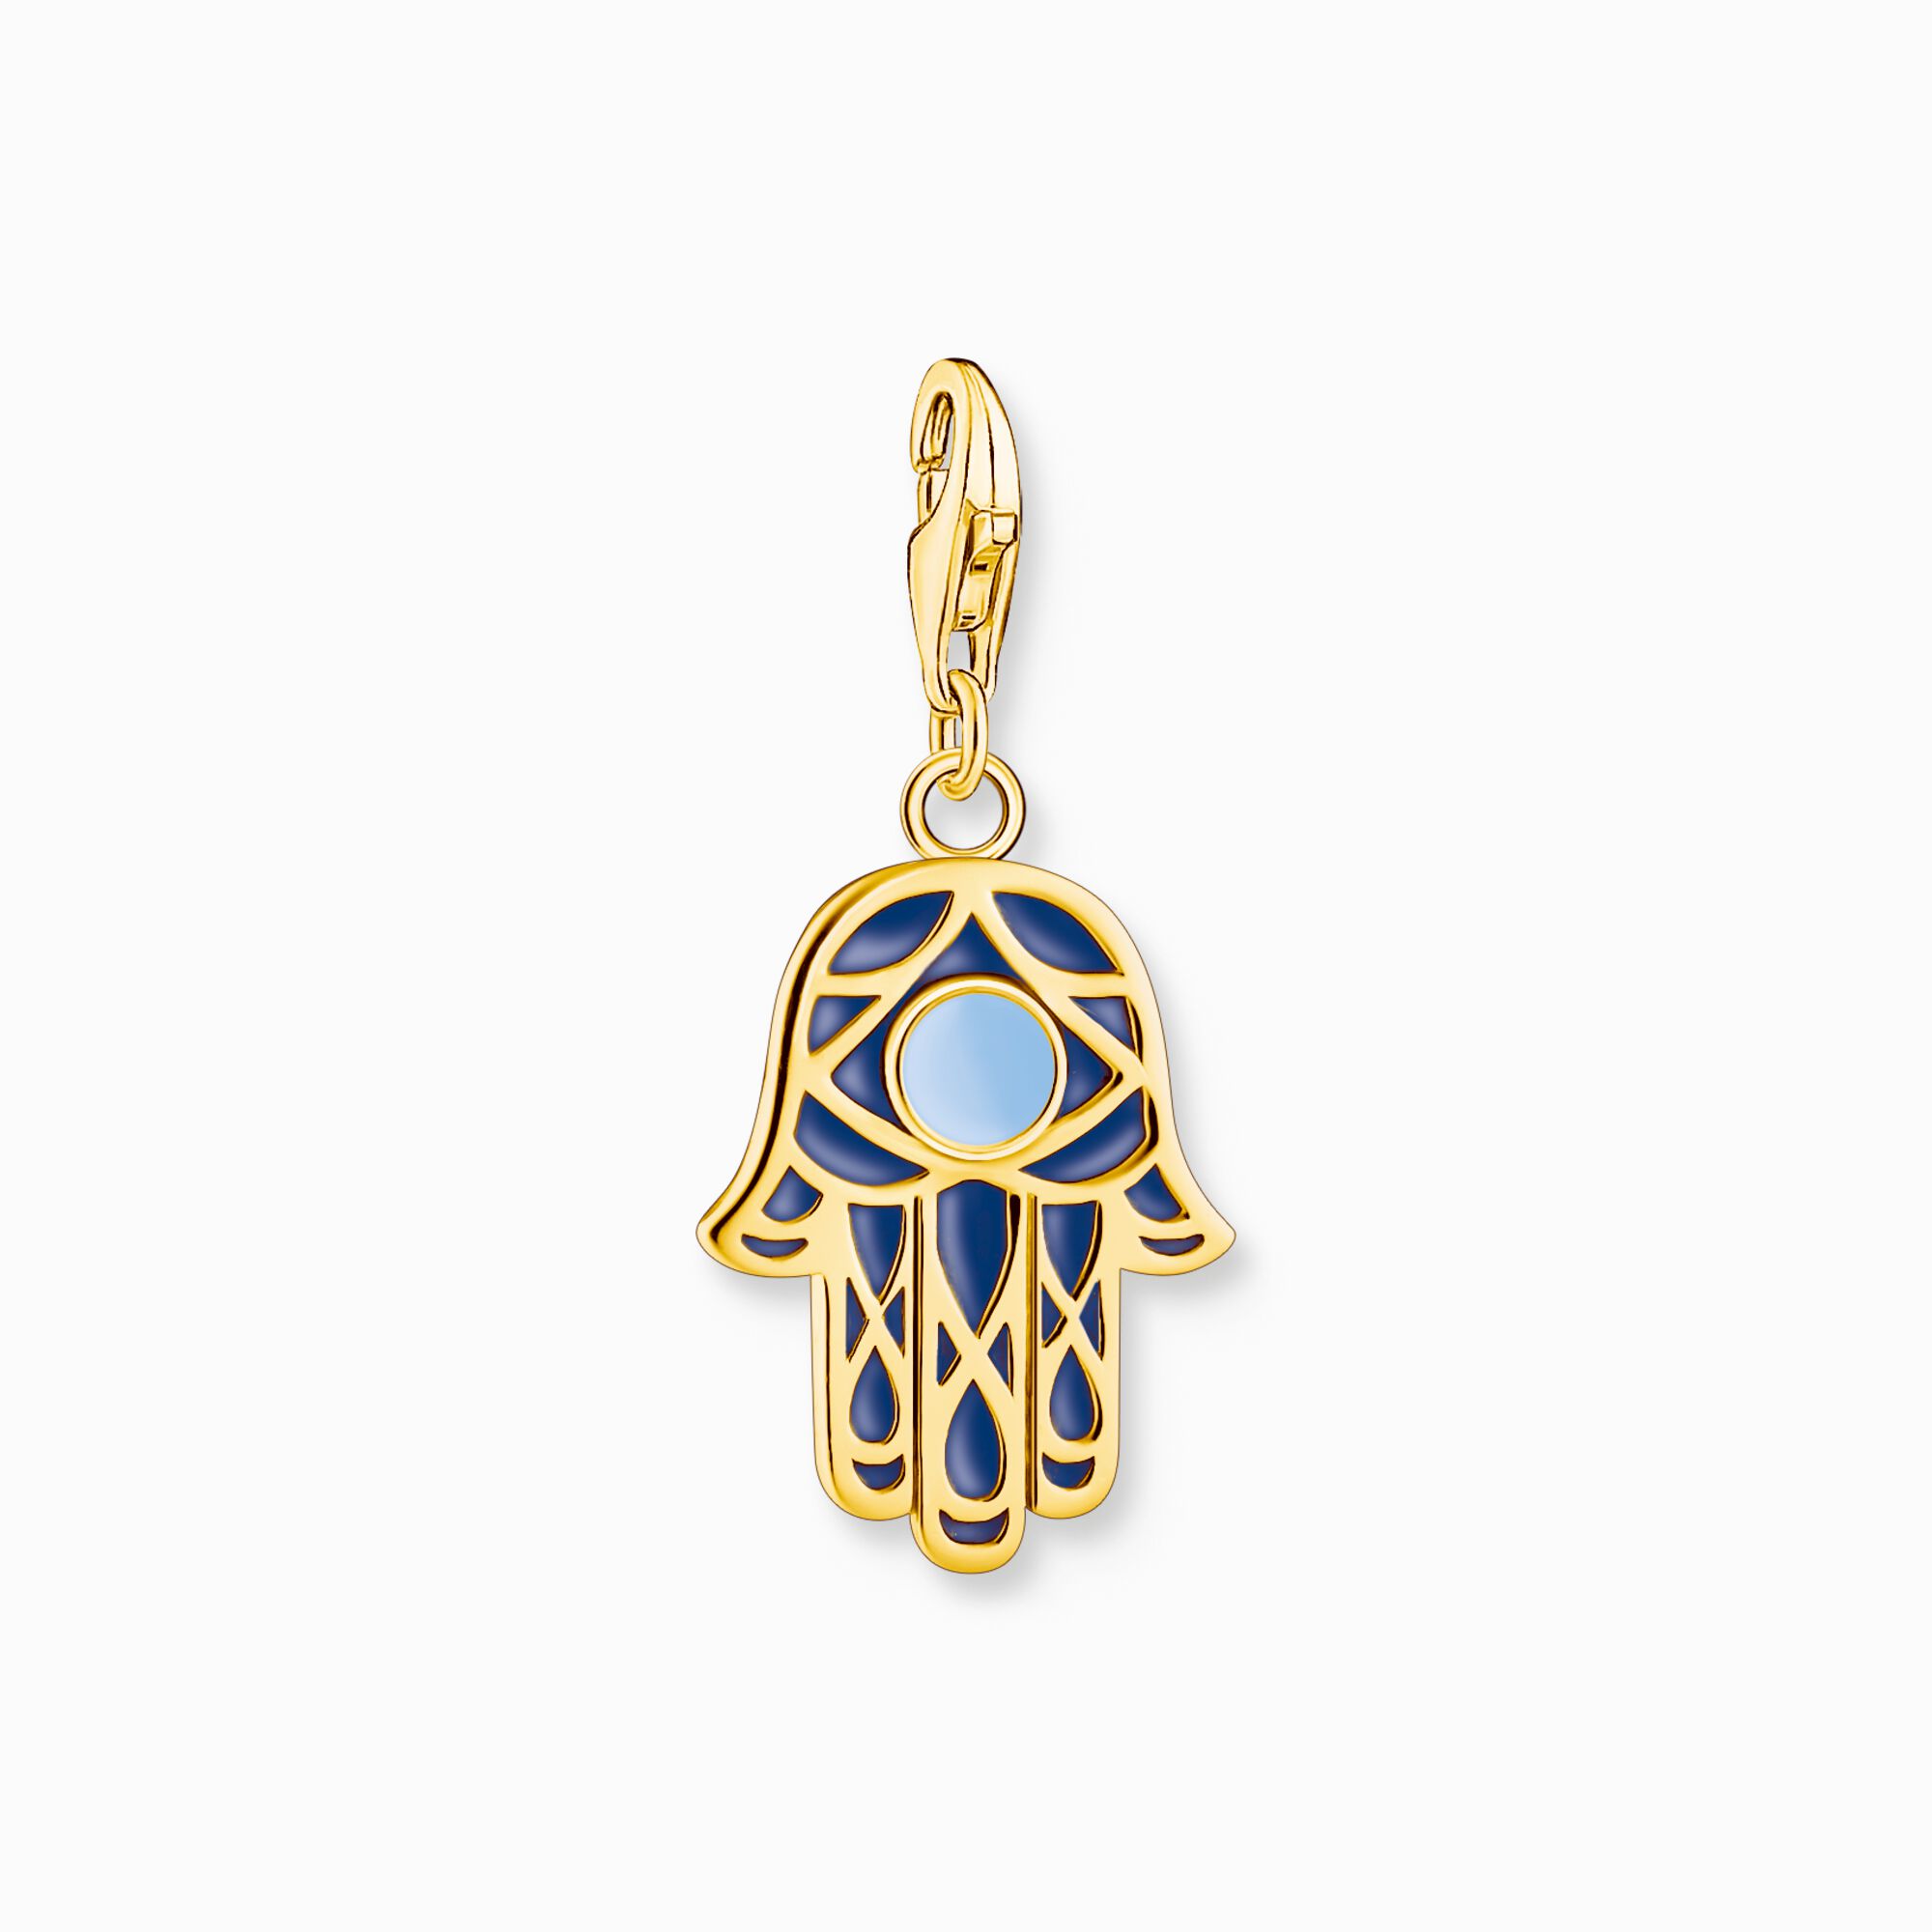 Charm pendant Hand of Fatima with cold enamel yellow-gold plated from the Charm Club collection in the THOMAS SABO online store